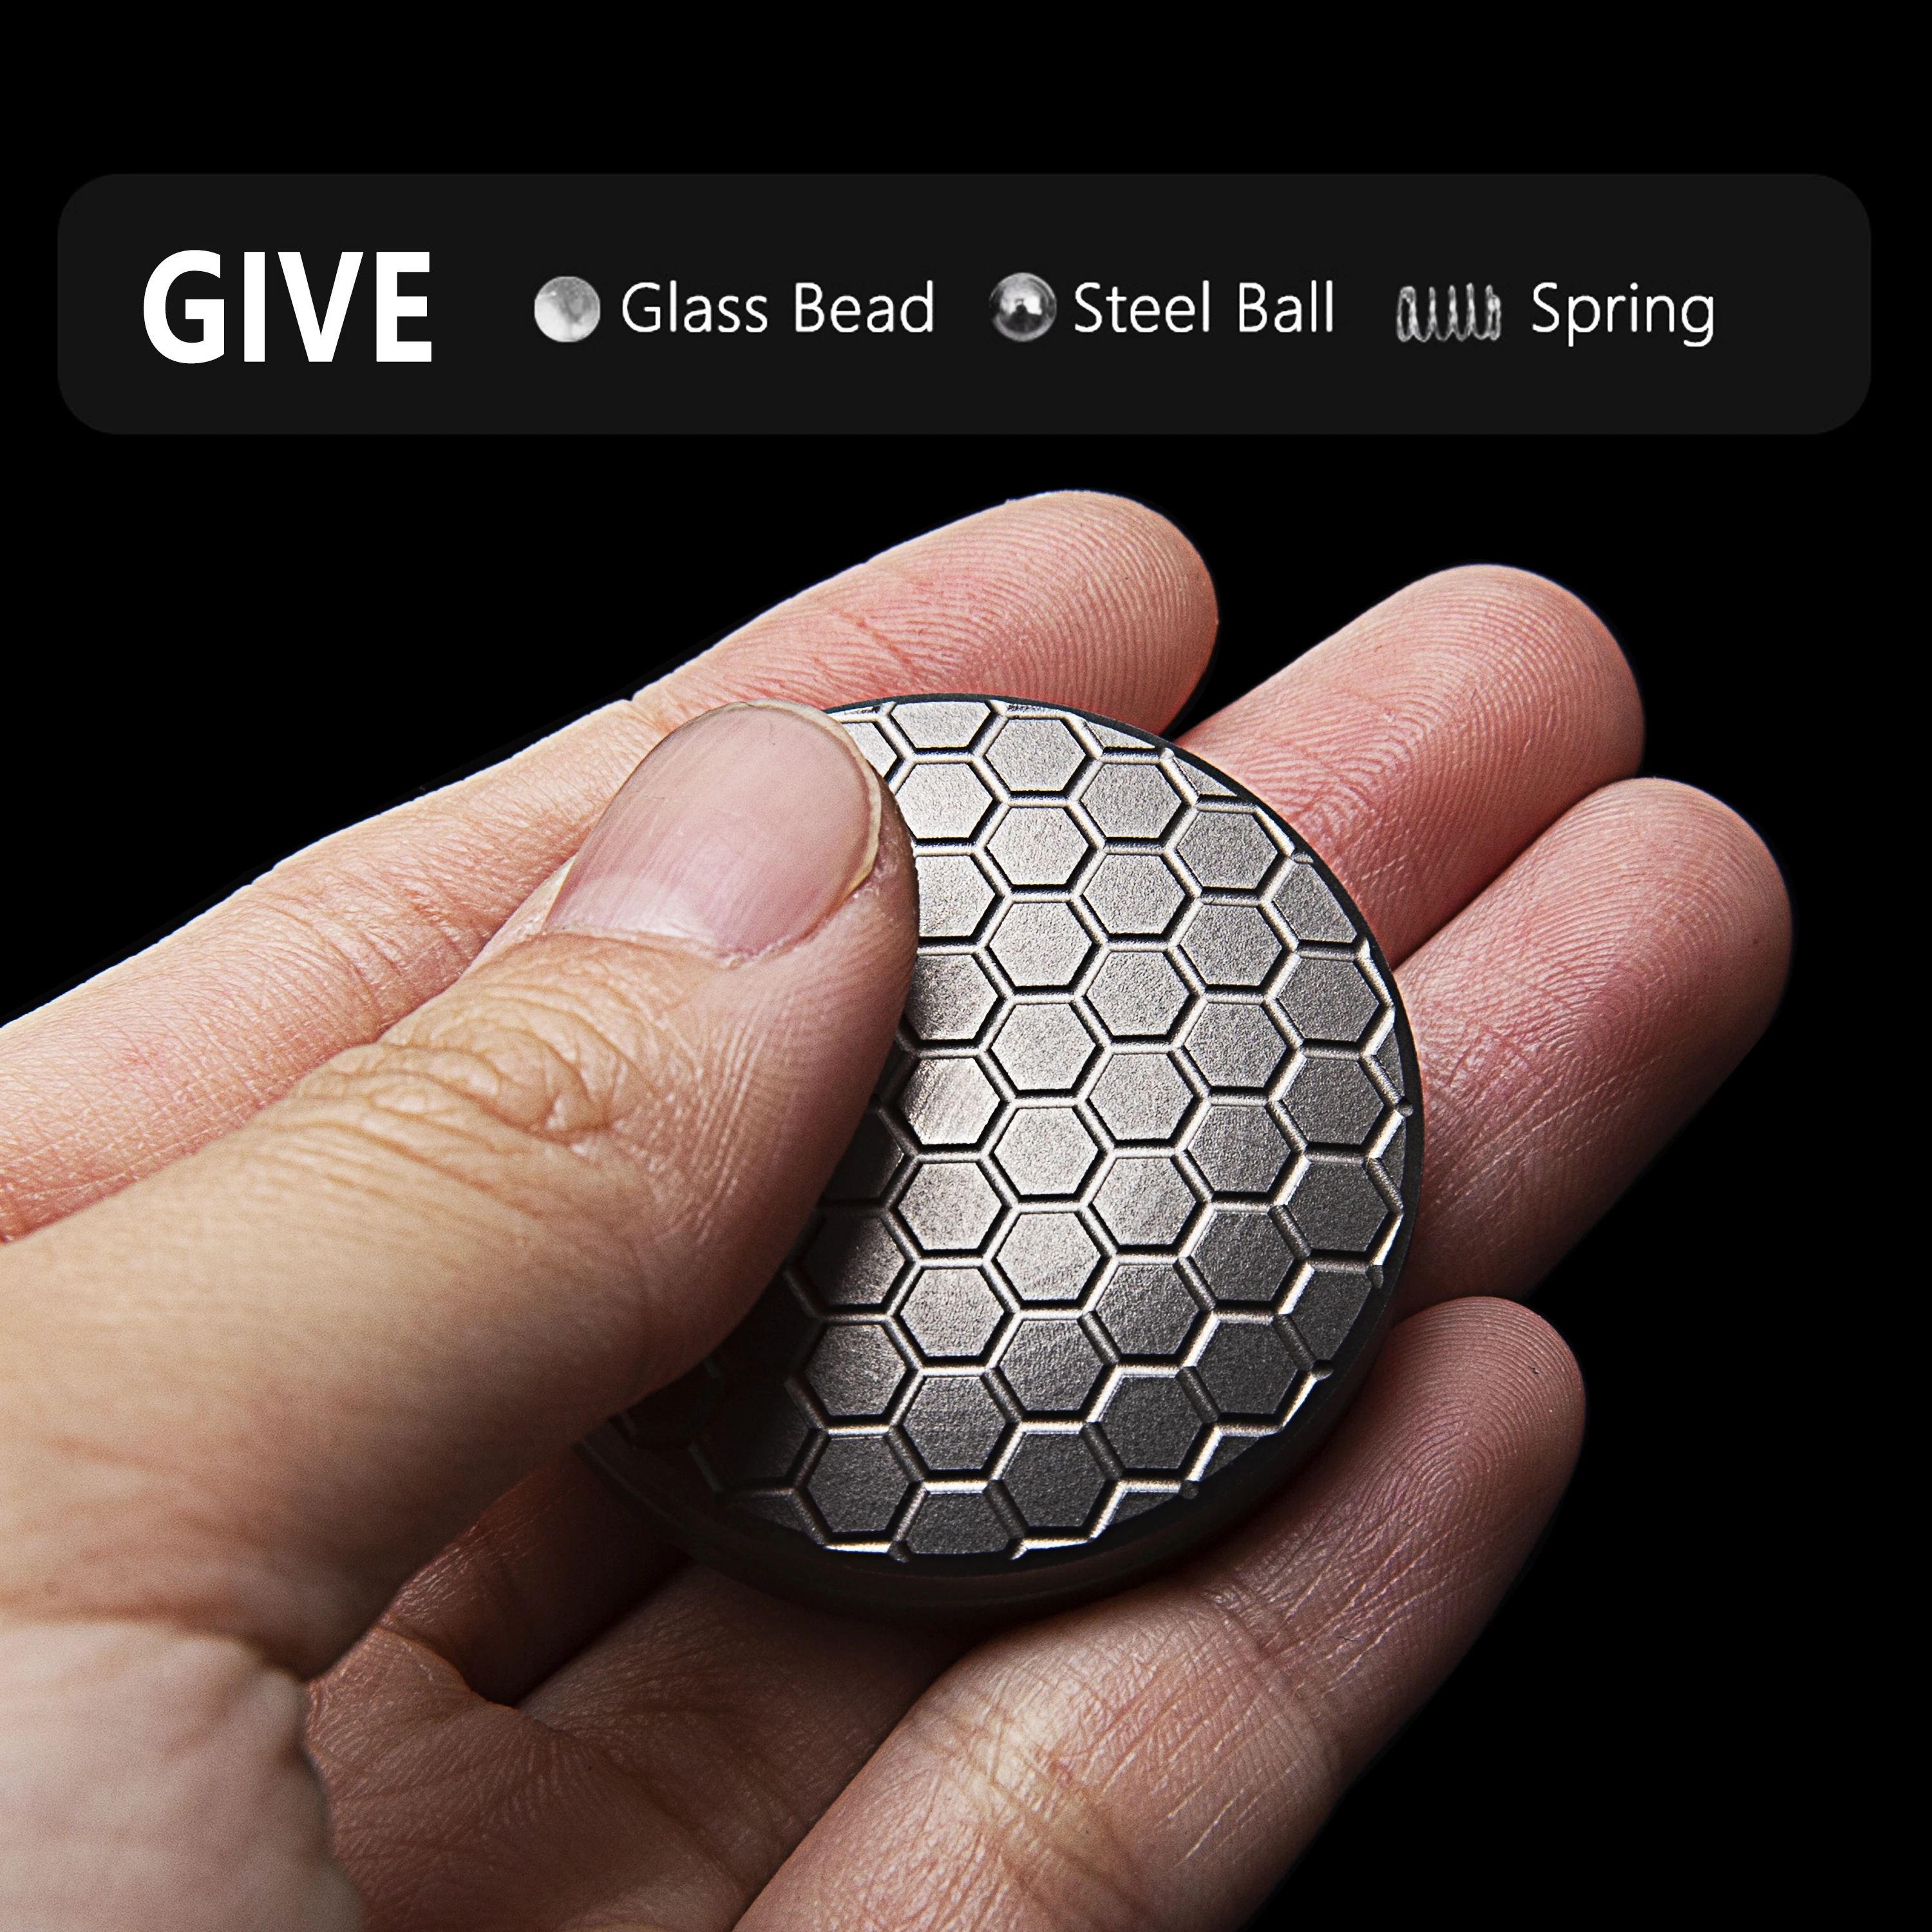 Titanium Alloy Stress Relief Toys For Adult EDC Fingertips Pressure Reducing Tools Fidget Creative And Novel Honeycomb Toys New